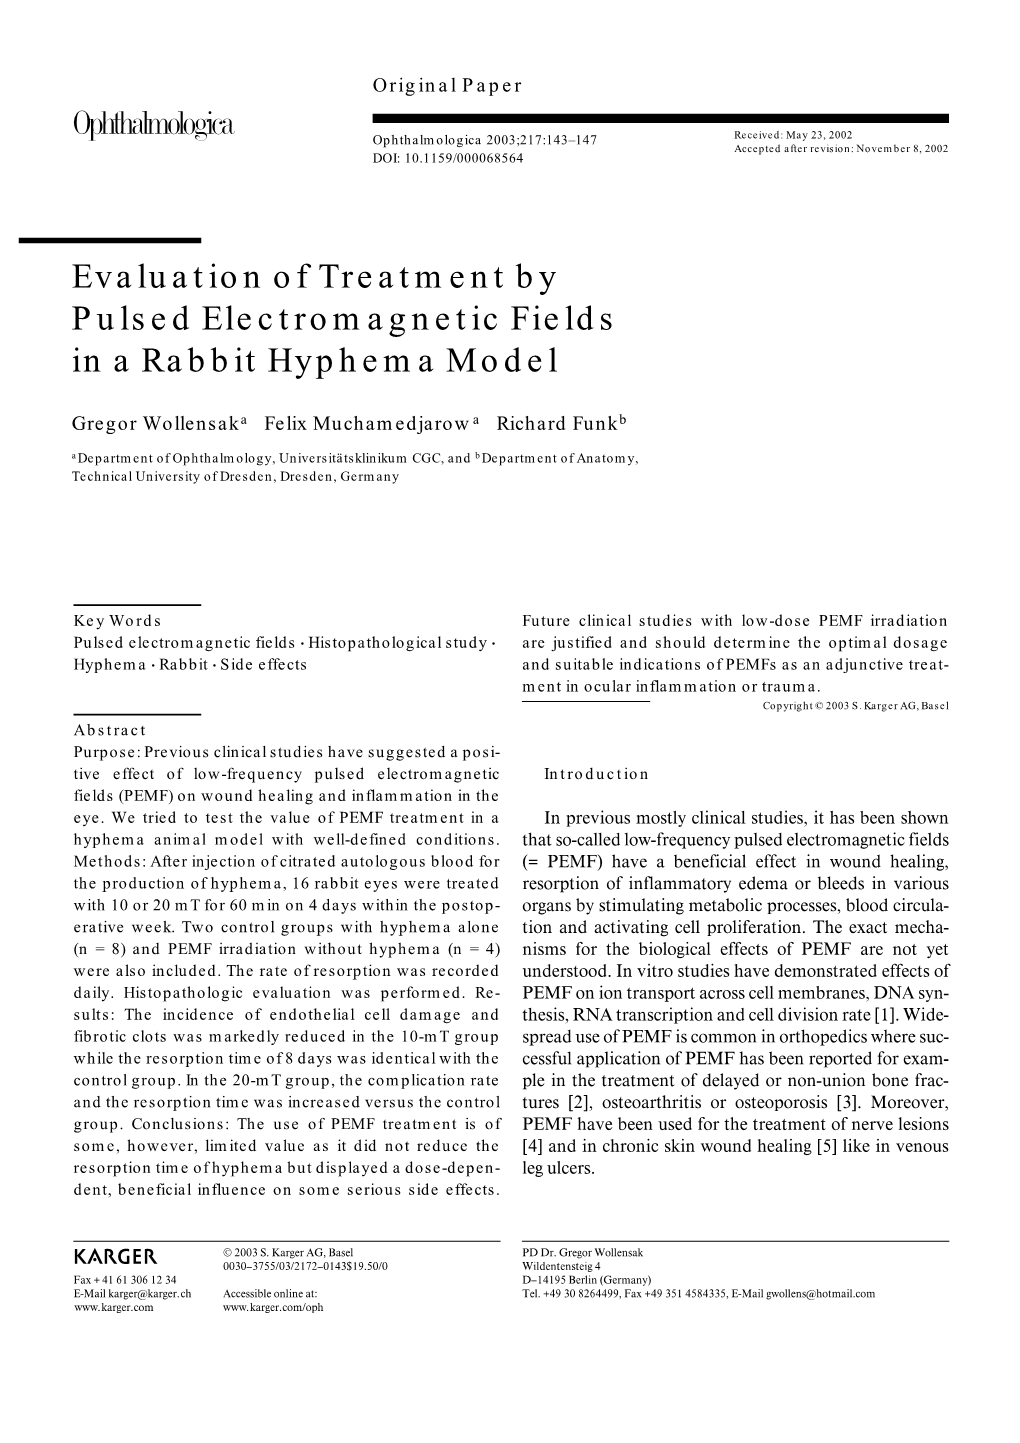 Evaluation of Treatment by Pulsed Electromagnetic Fields in a Rabbit Hyphema Model